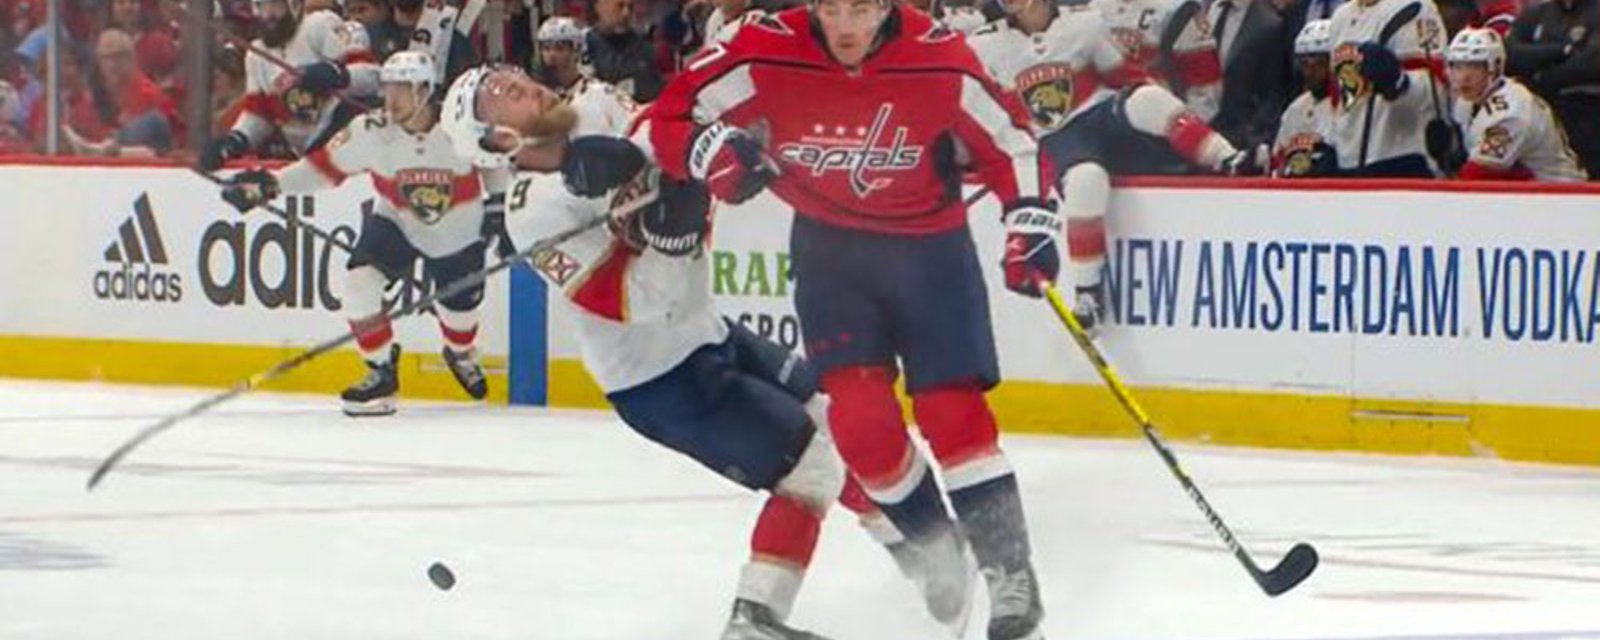 No punishment coming for T.J. Oshie after hit on Sam Bennett